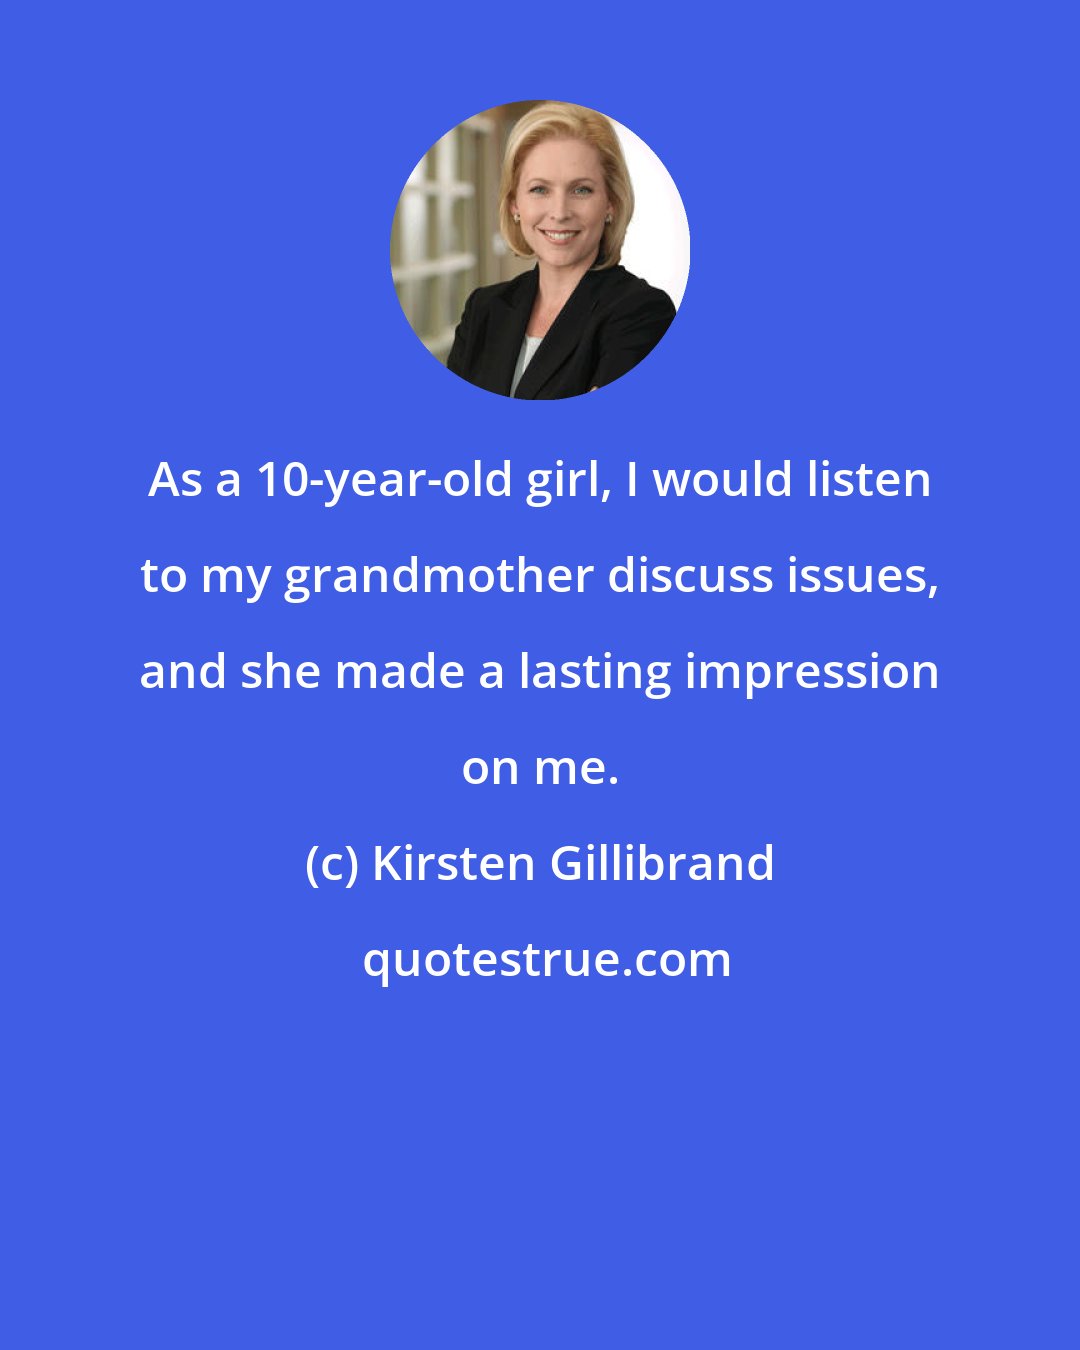 Kirsten Gillibrand: As a 10-year-old girl, I would listen to my grandmother discuss issues, and she made a lasting impression on me.